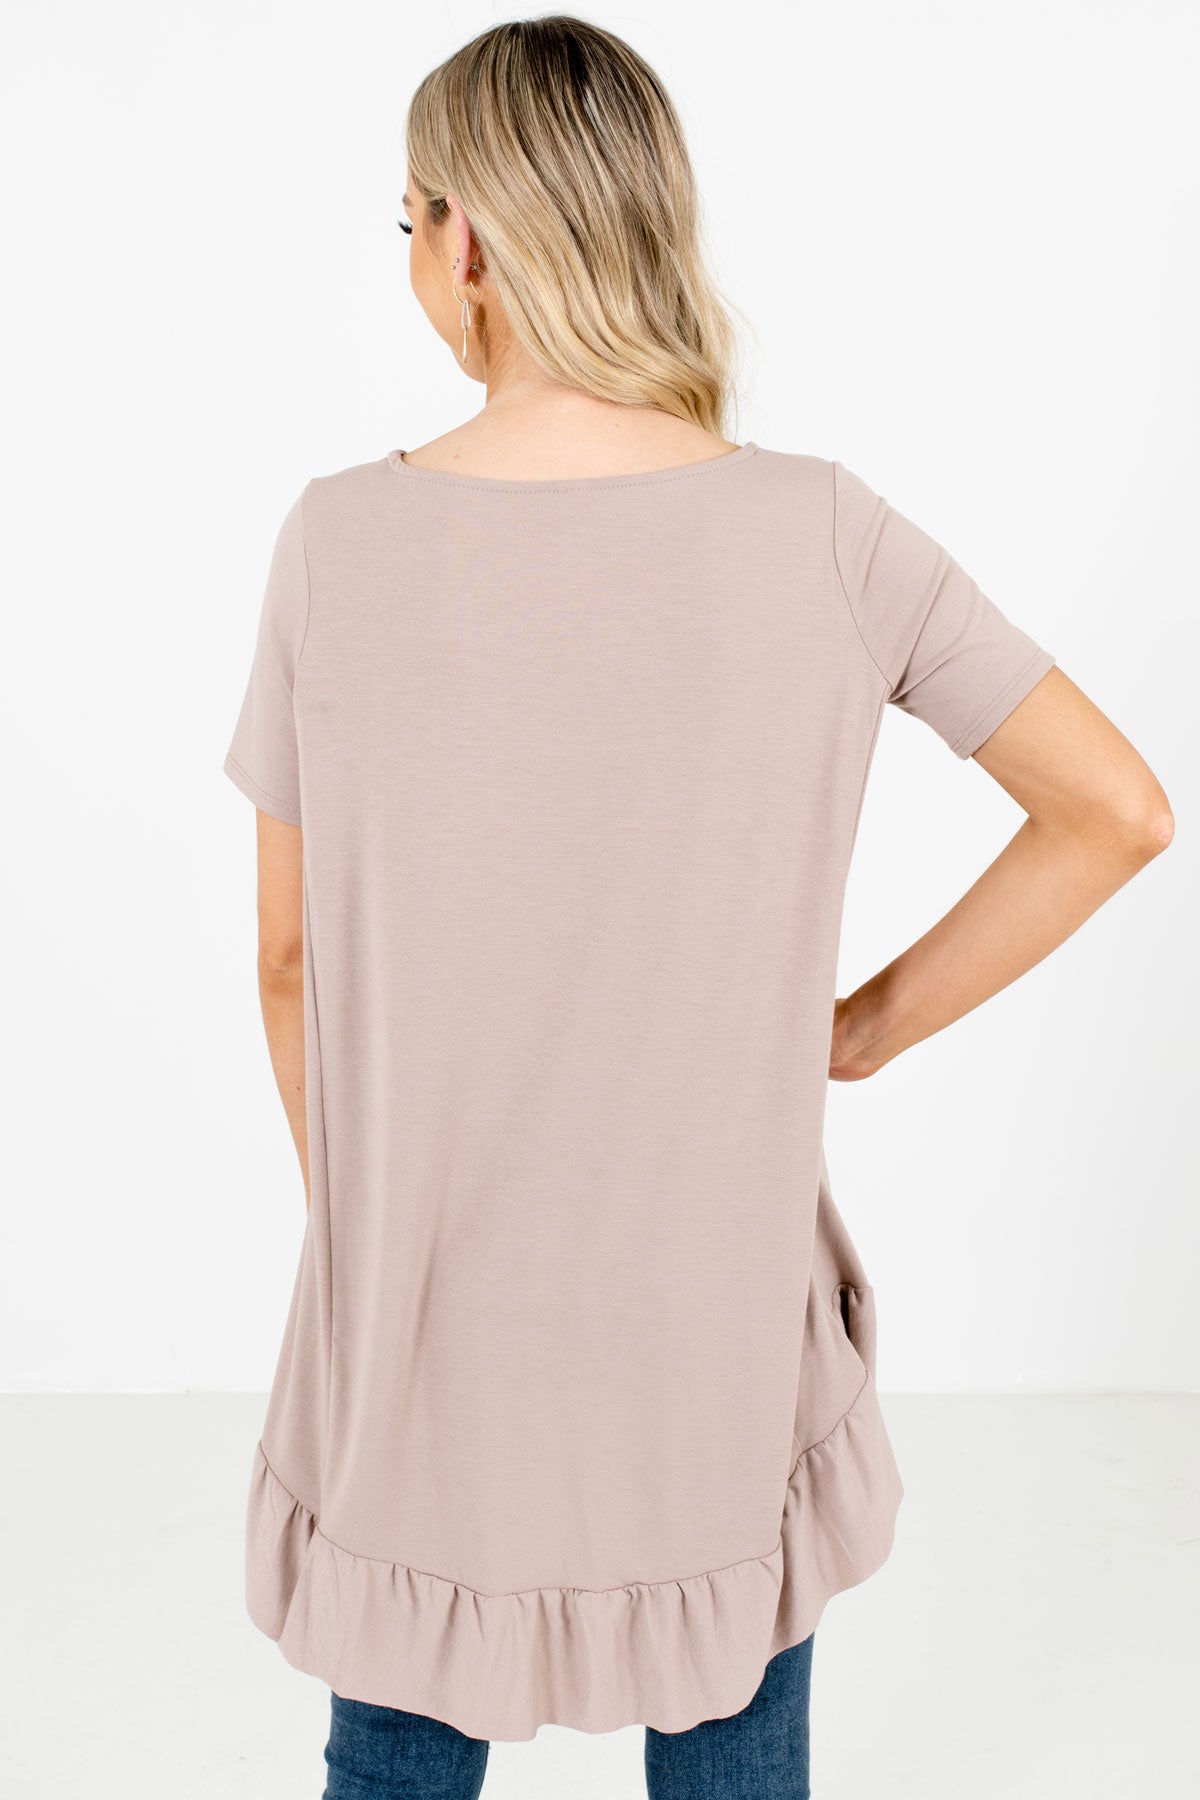 Women's Taupe Brown Long Length Boutique Tops